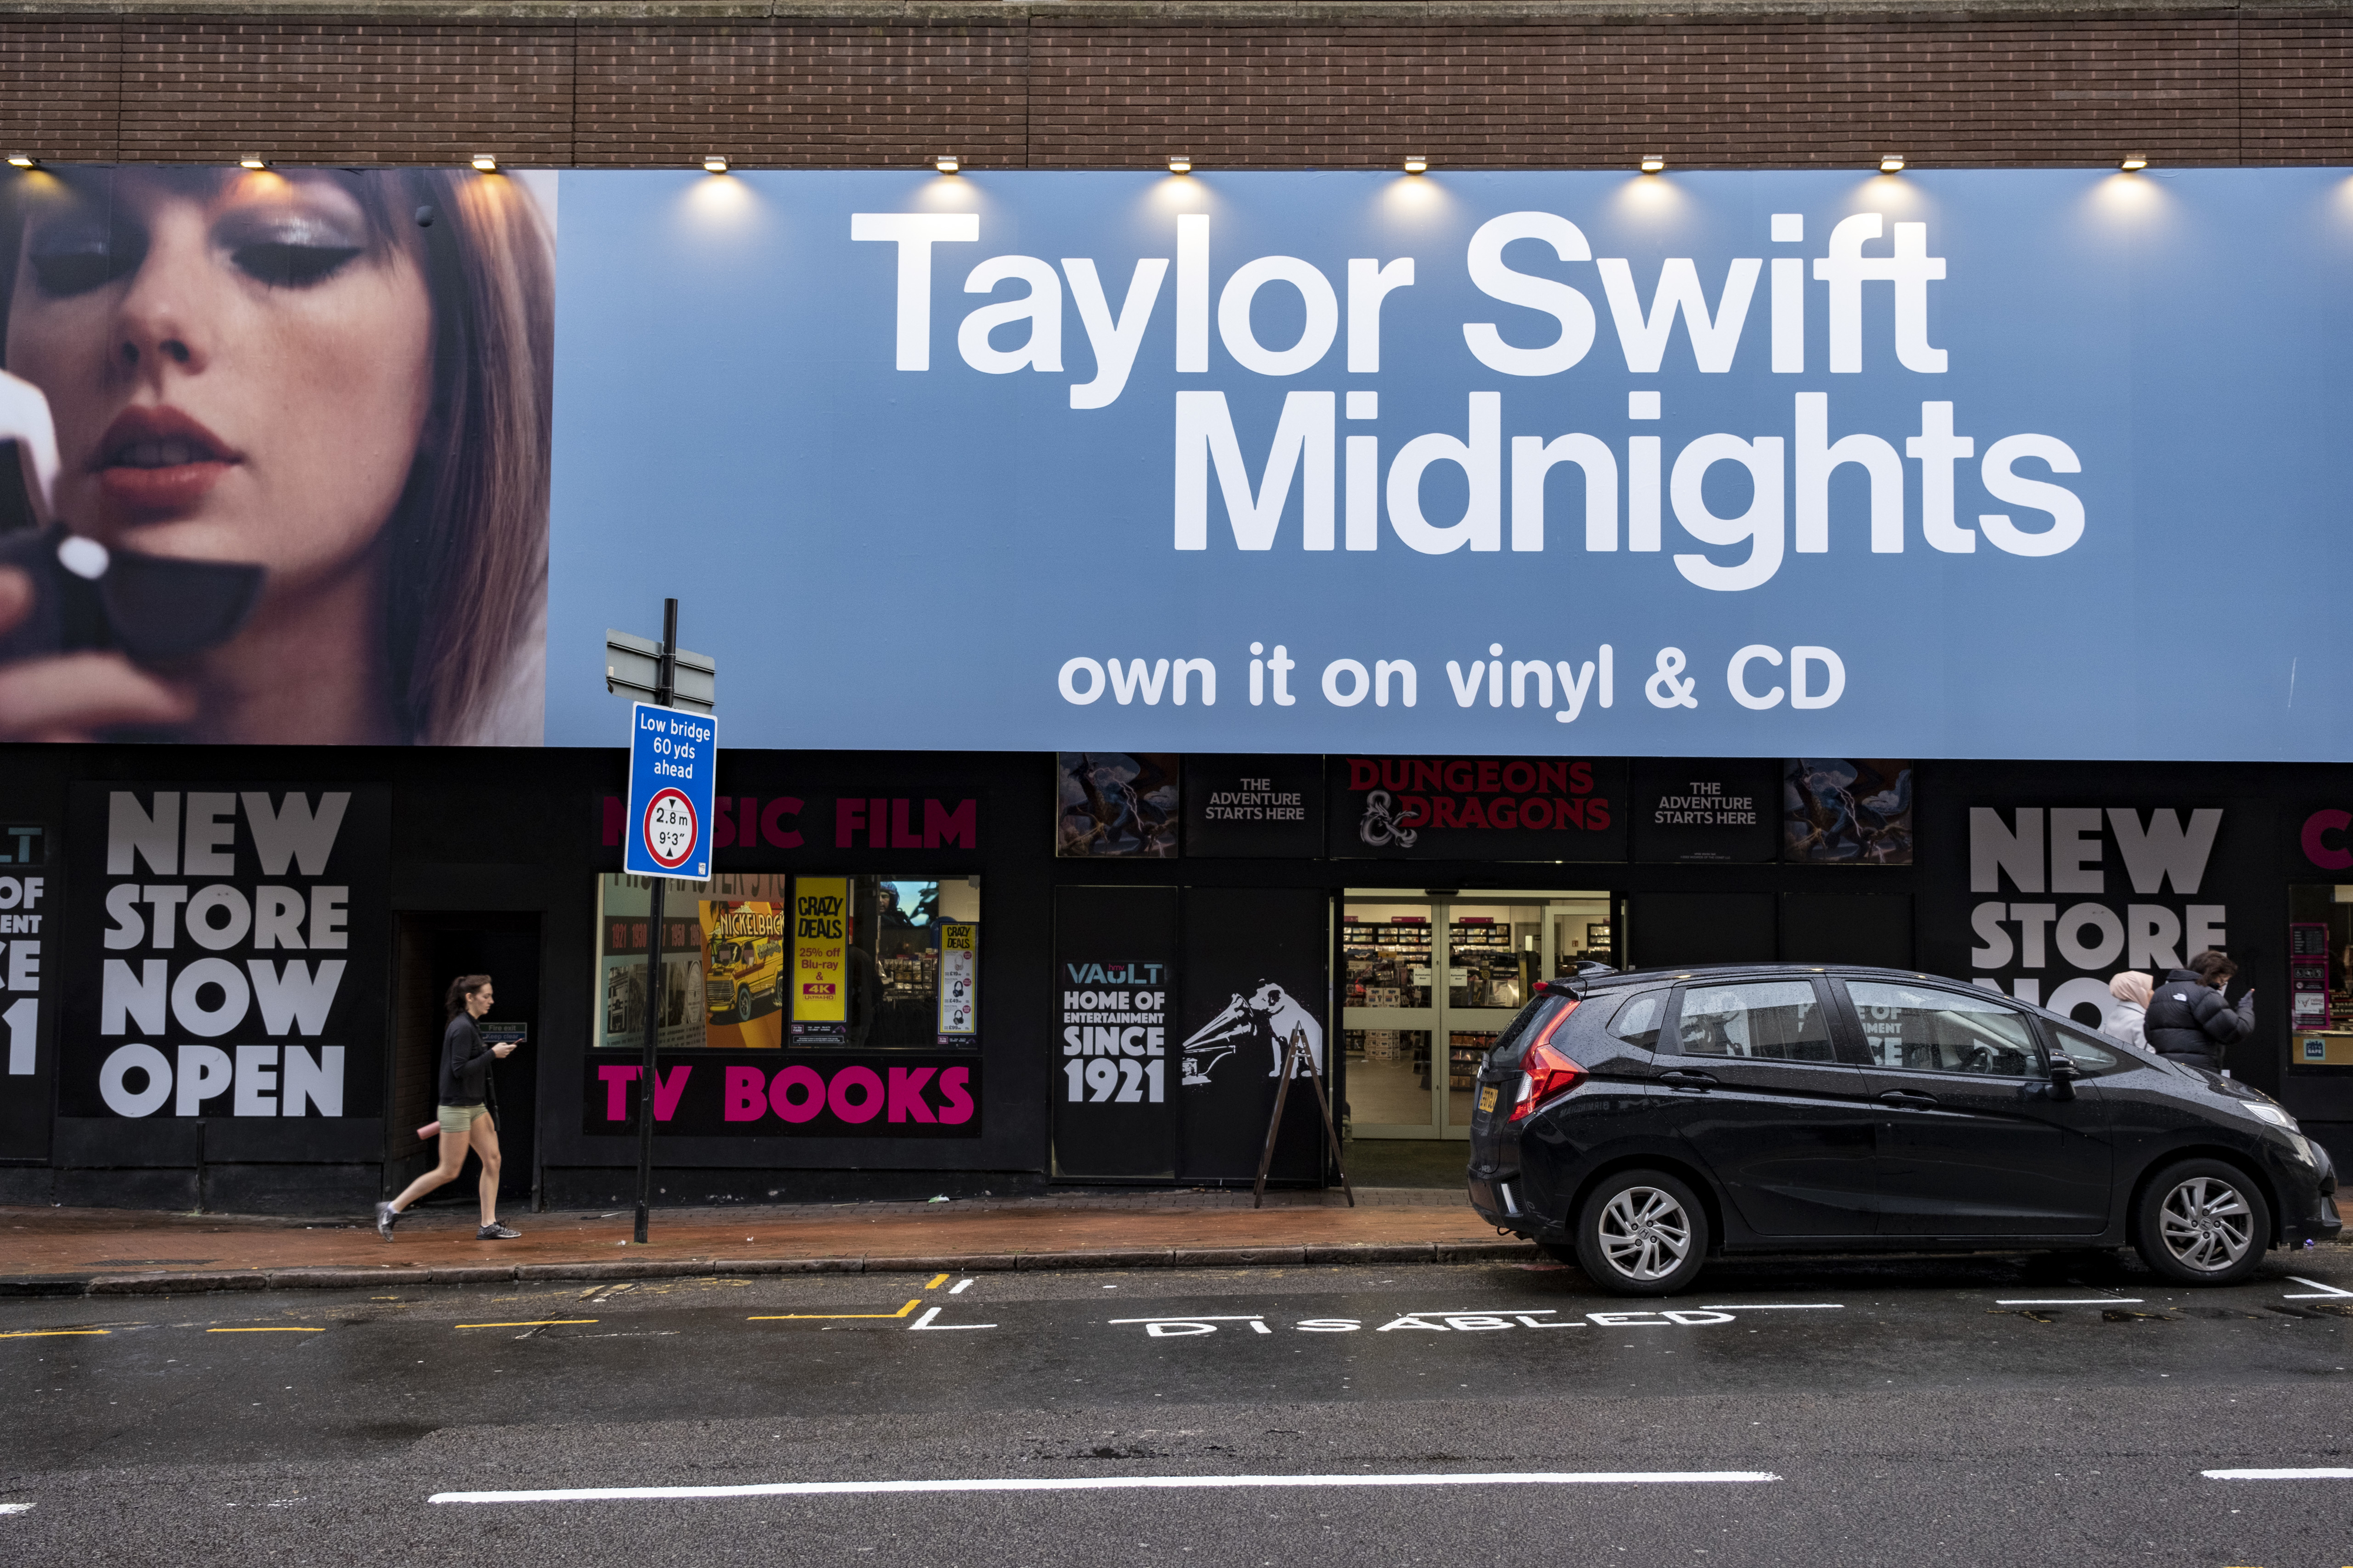 Billboard featuring Taylor Swift advertising her &quot;Midnights&quot; album available on vinyl and CD above a street scene with shops and a car